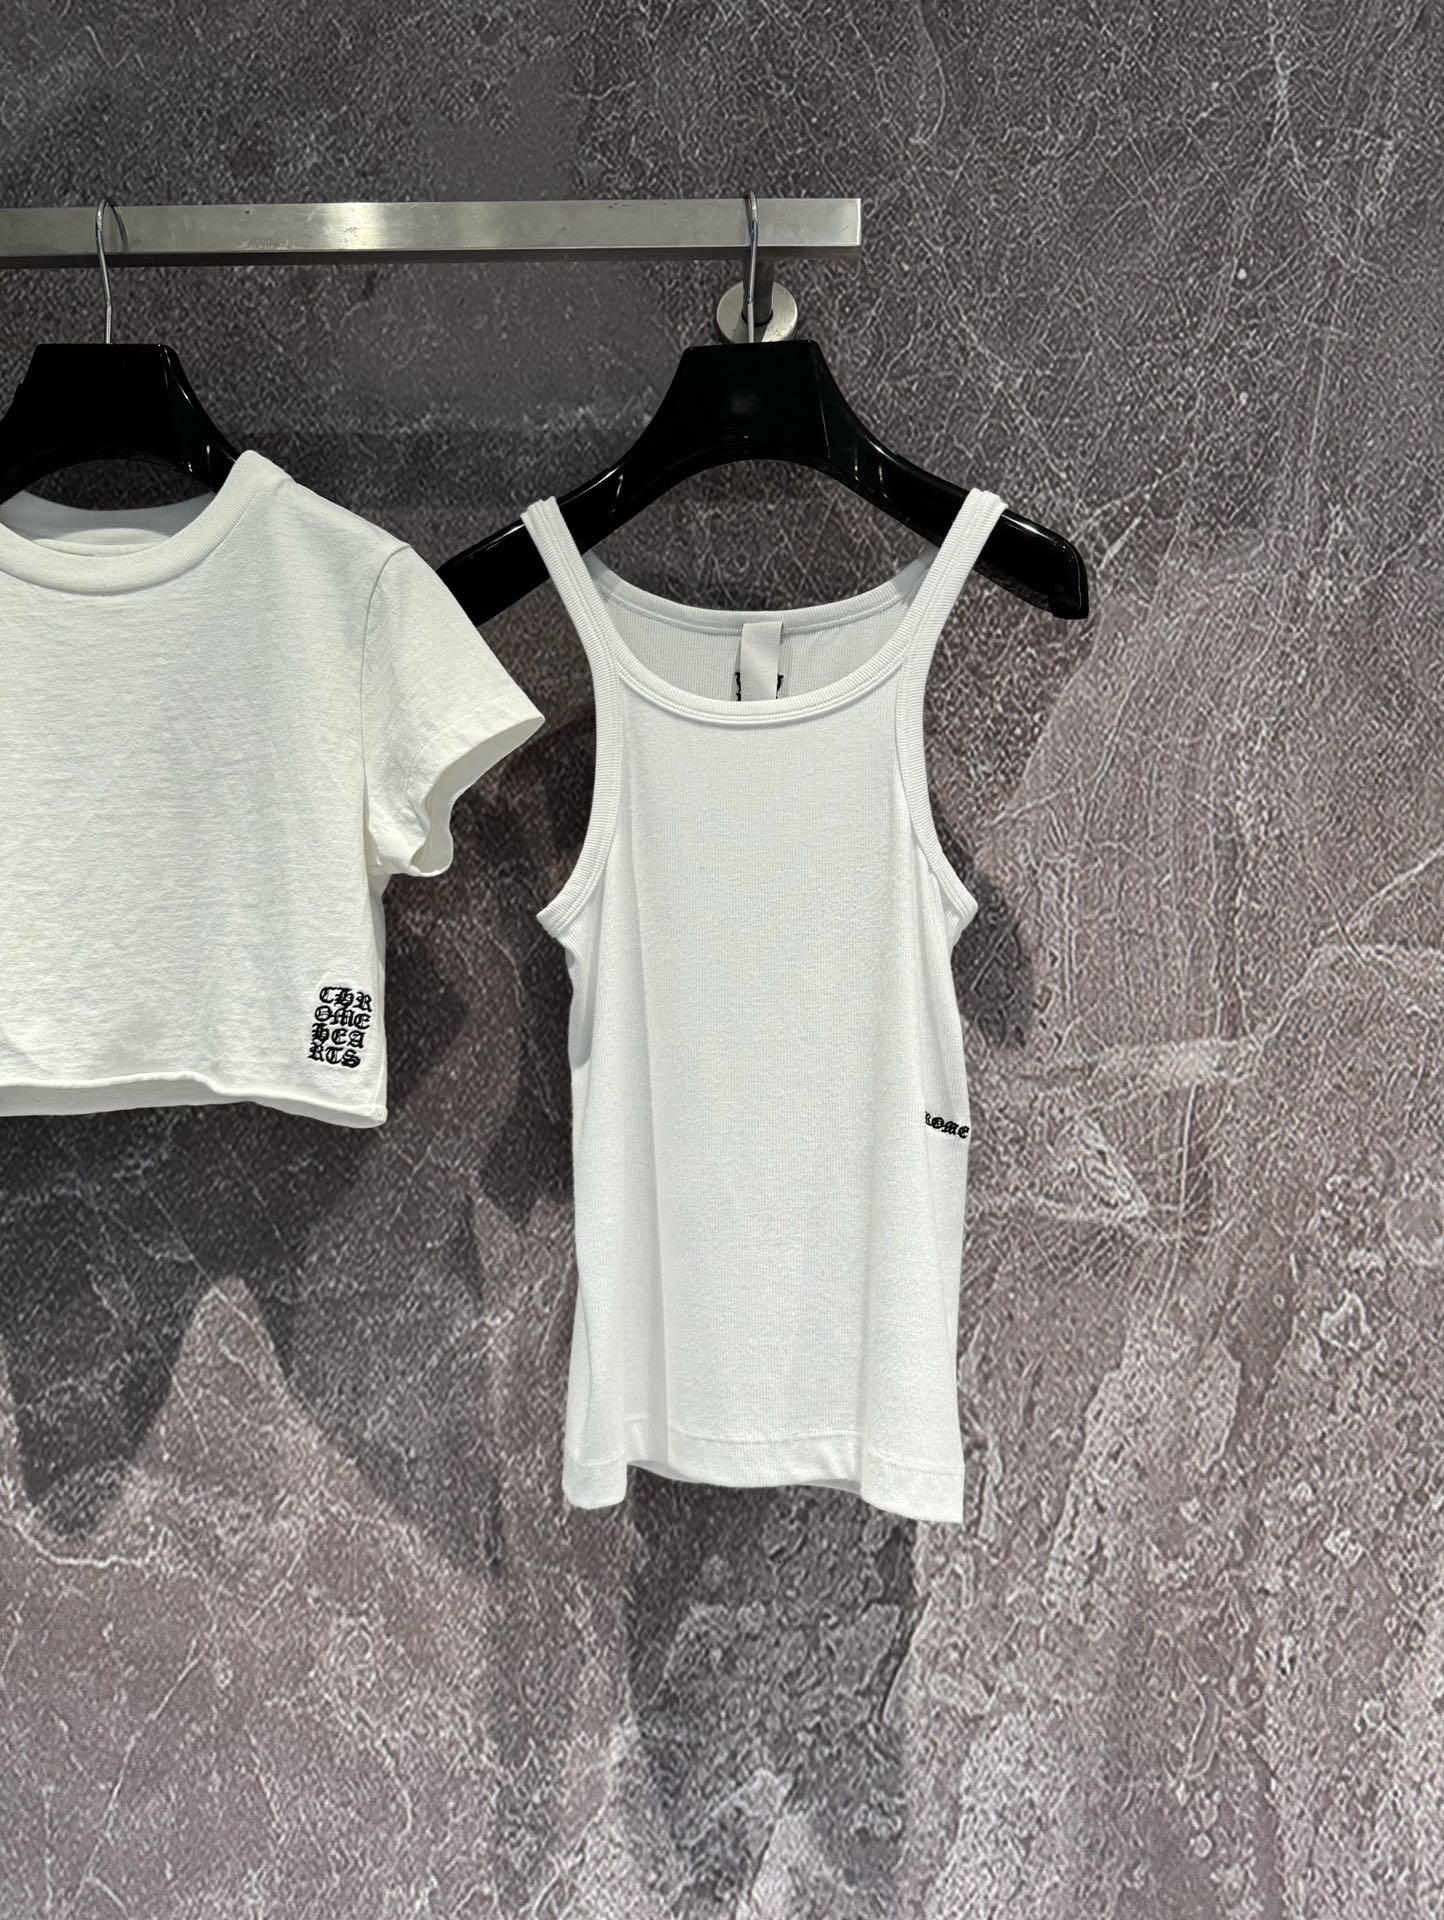 Chrome Hearts Clothing Shirts & Blouses Tank Tops&Camis White Embroidery Cotton Spring Collection